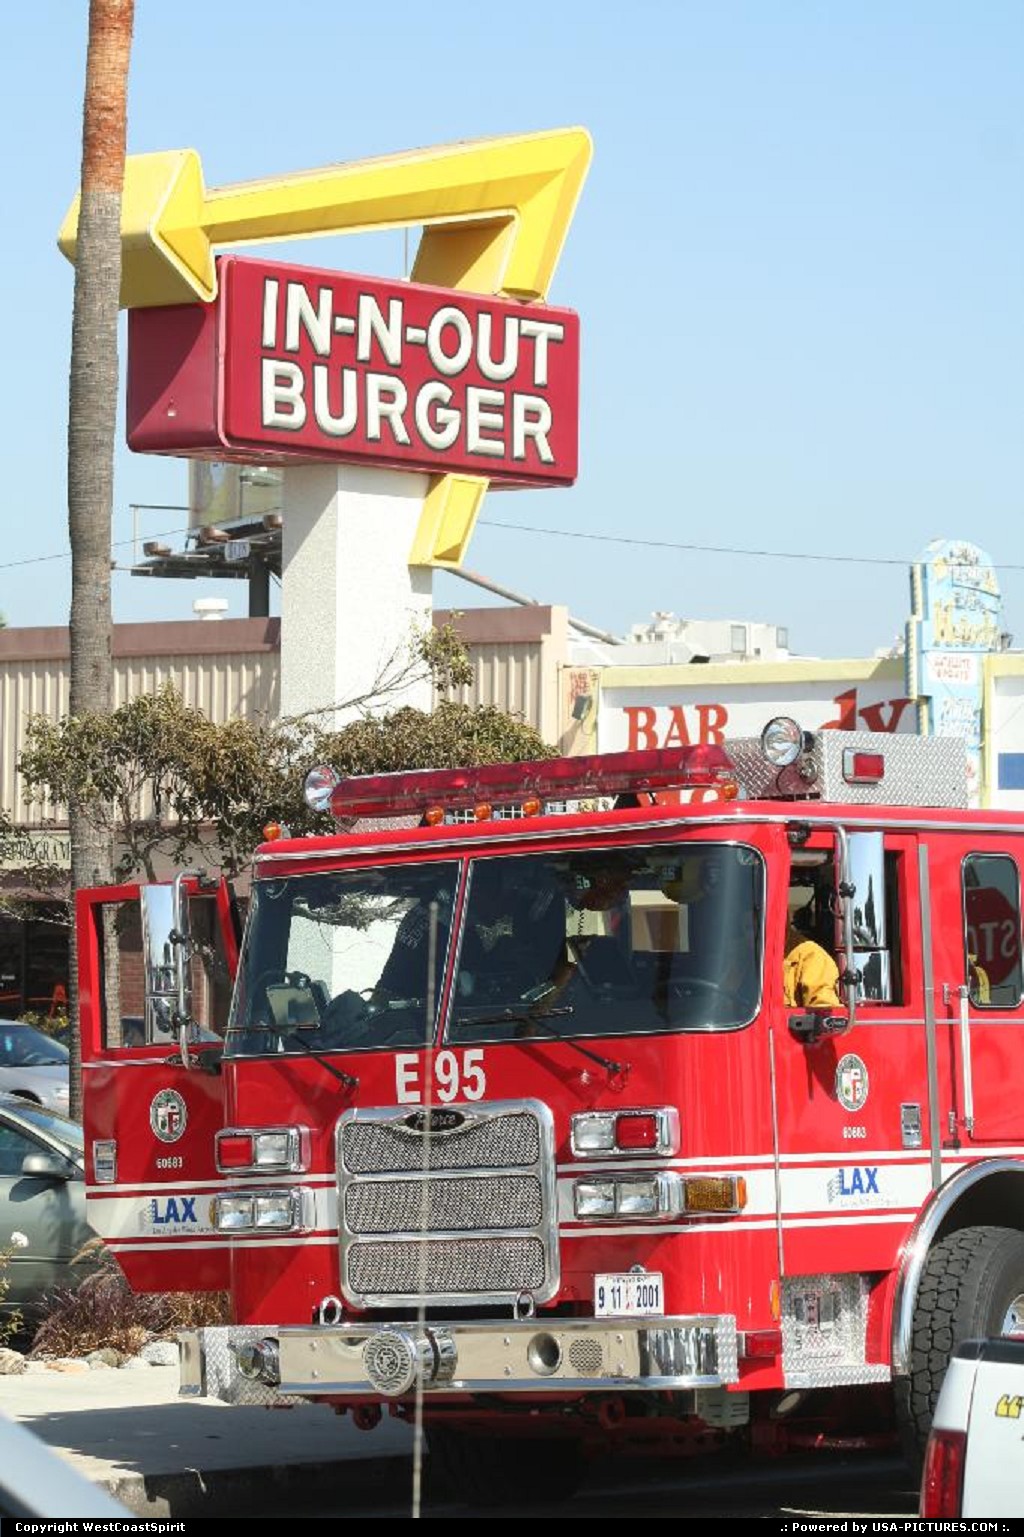 Picture by WestCoastSpirit: Los Angeles California   truck, firemen, lax, burger, in n out